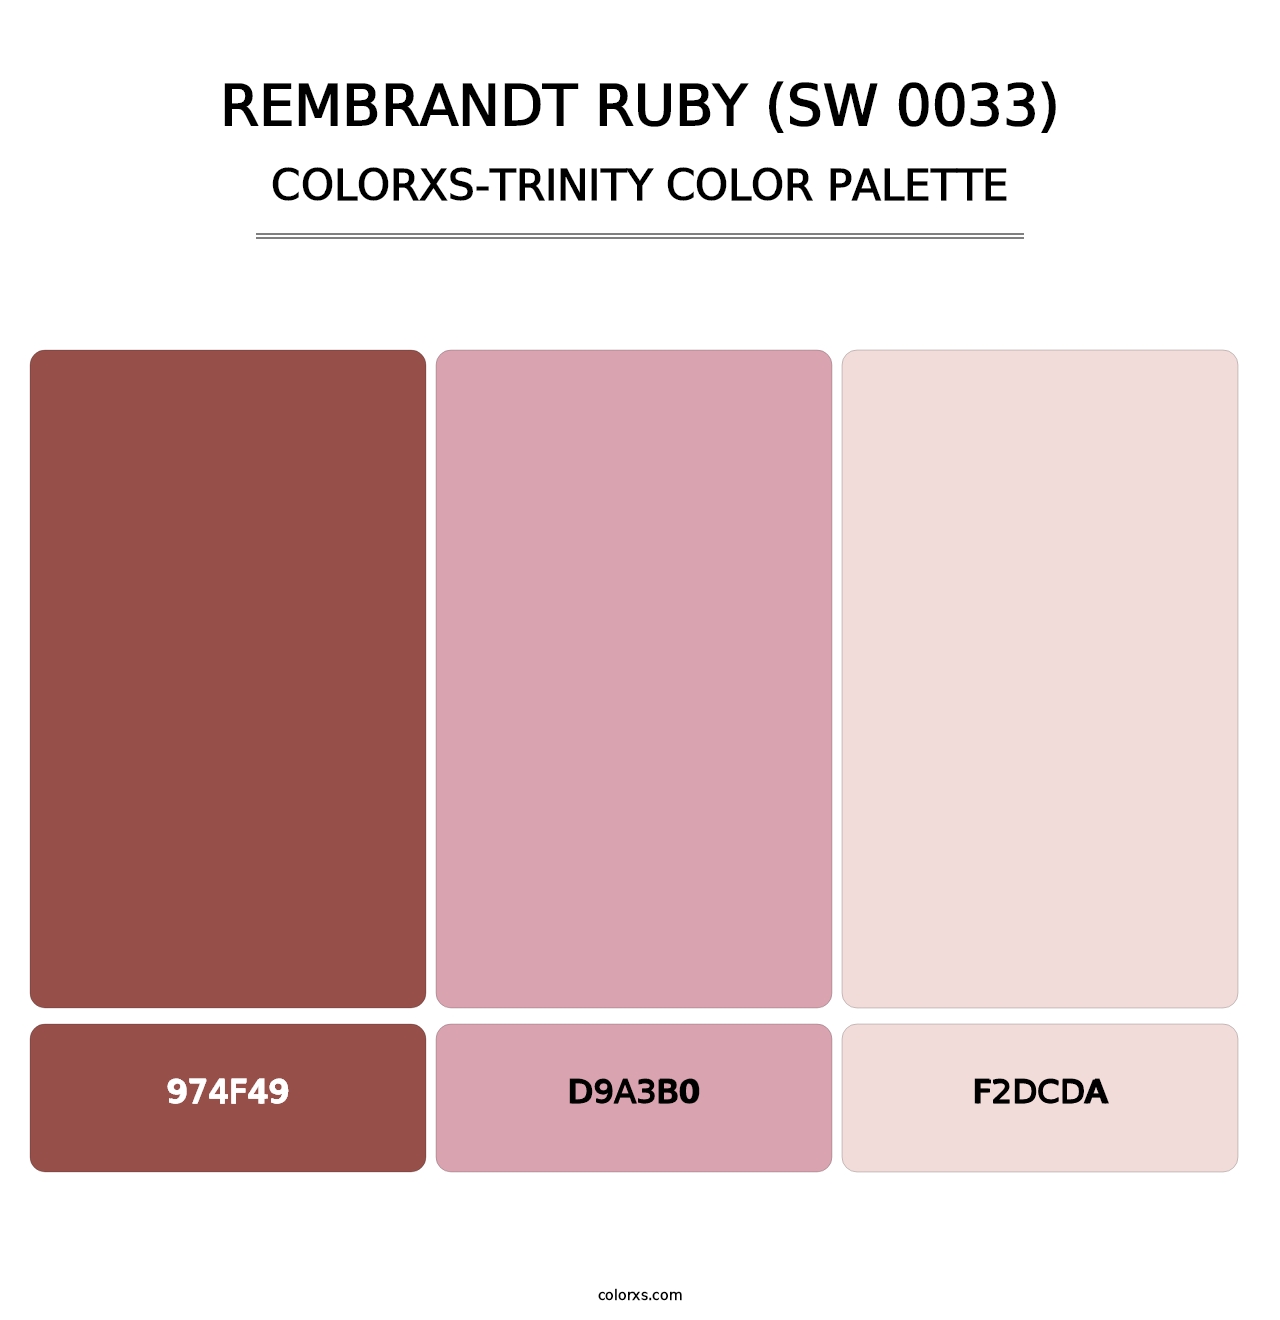 Rembrandt Ruby (SW 0033) - Colorxs Trinity Palette